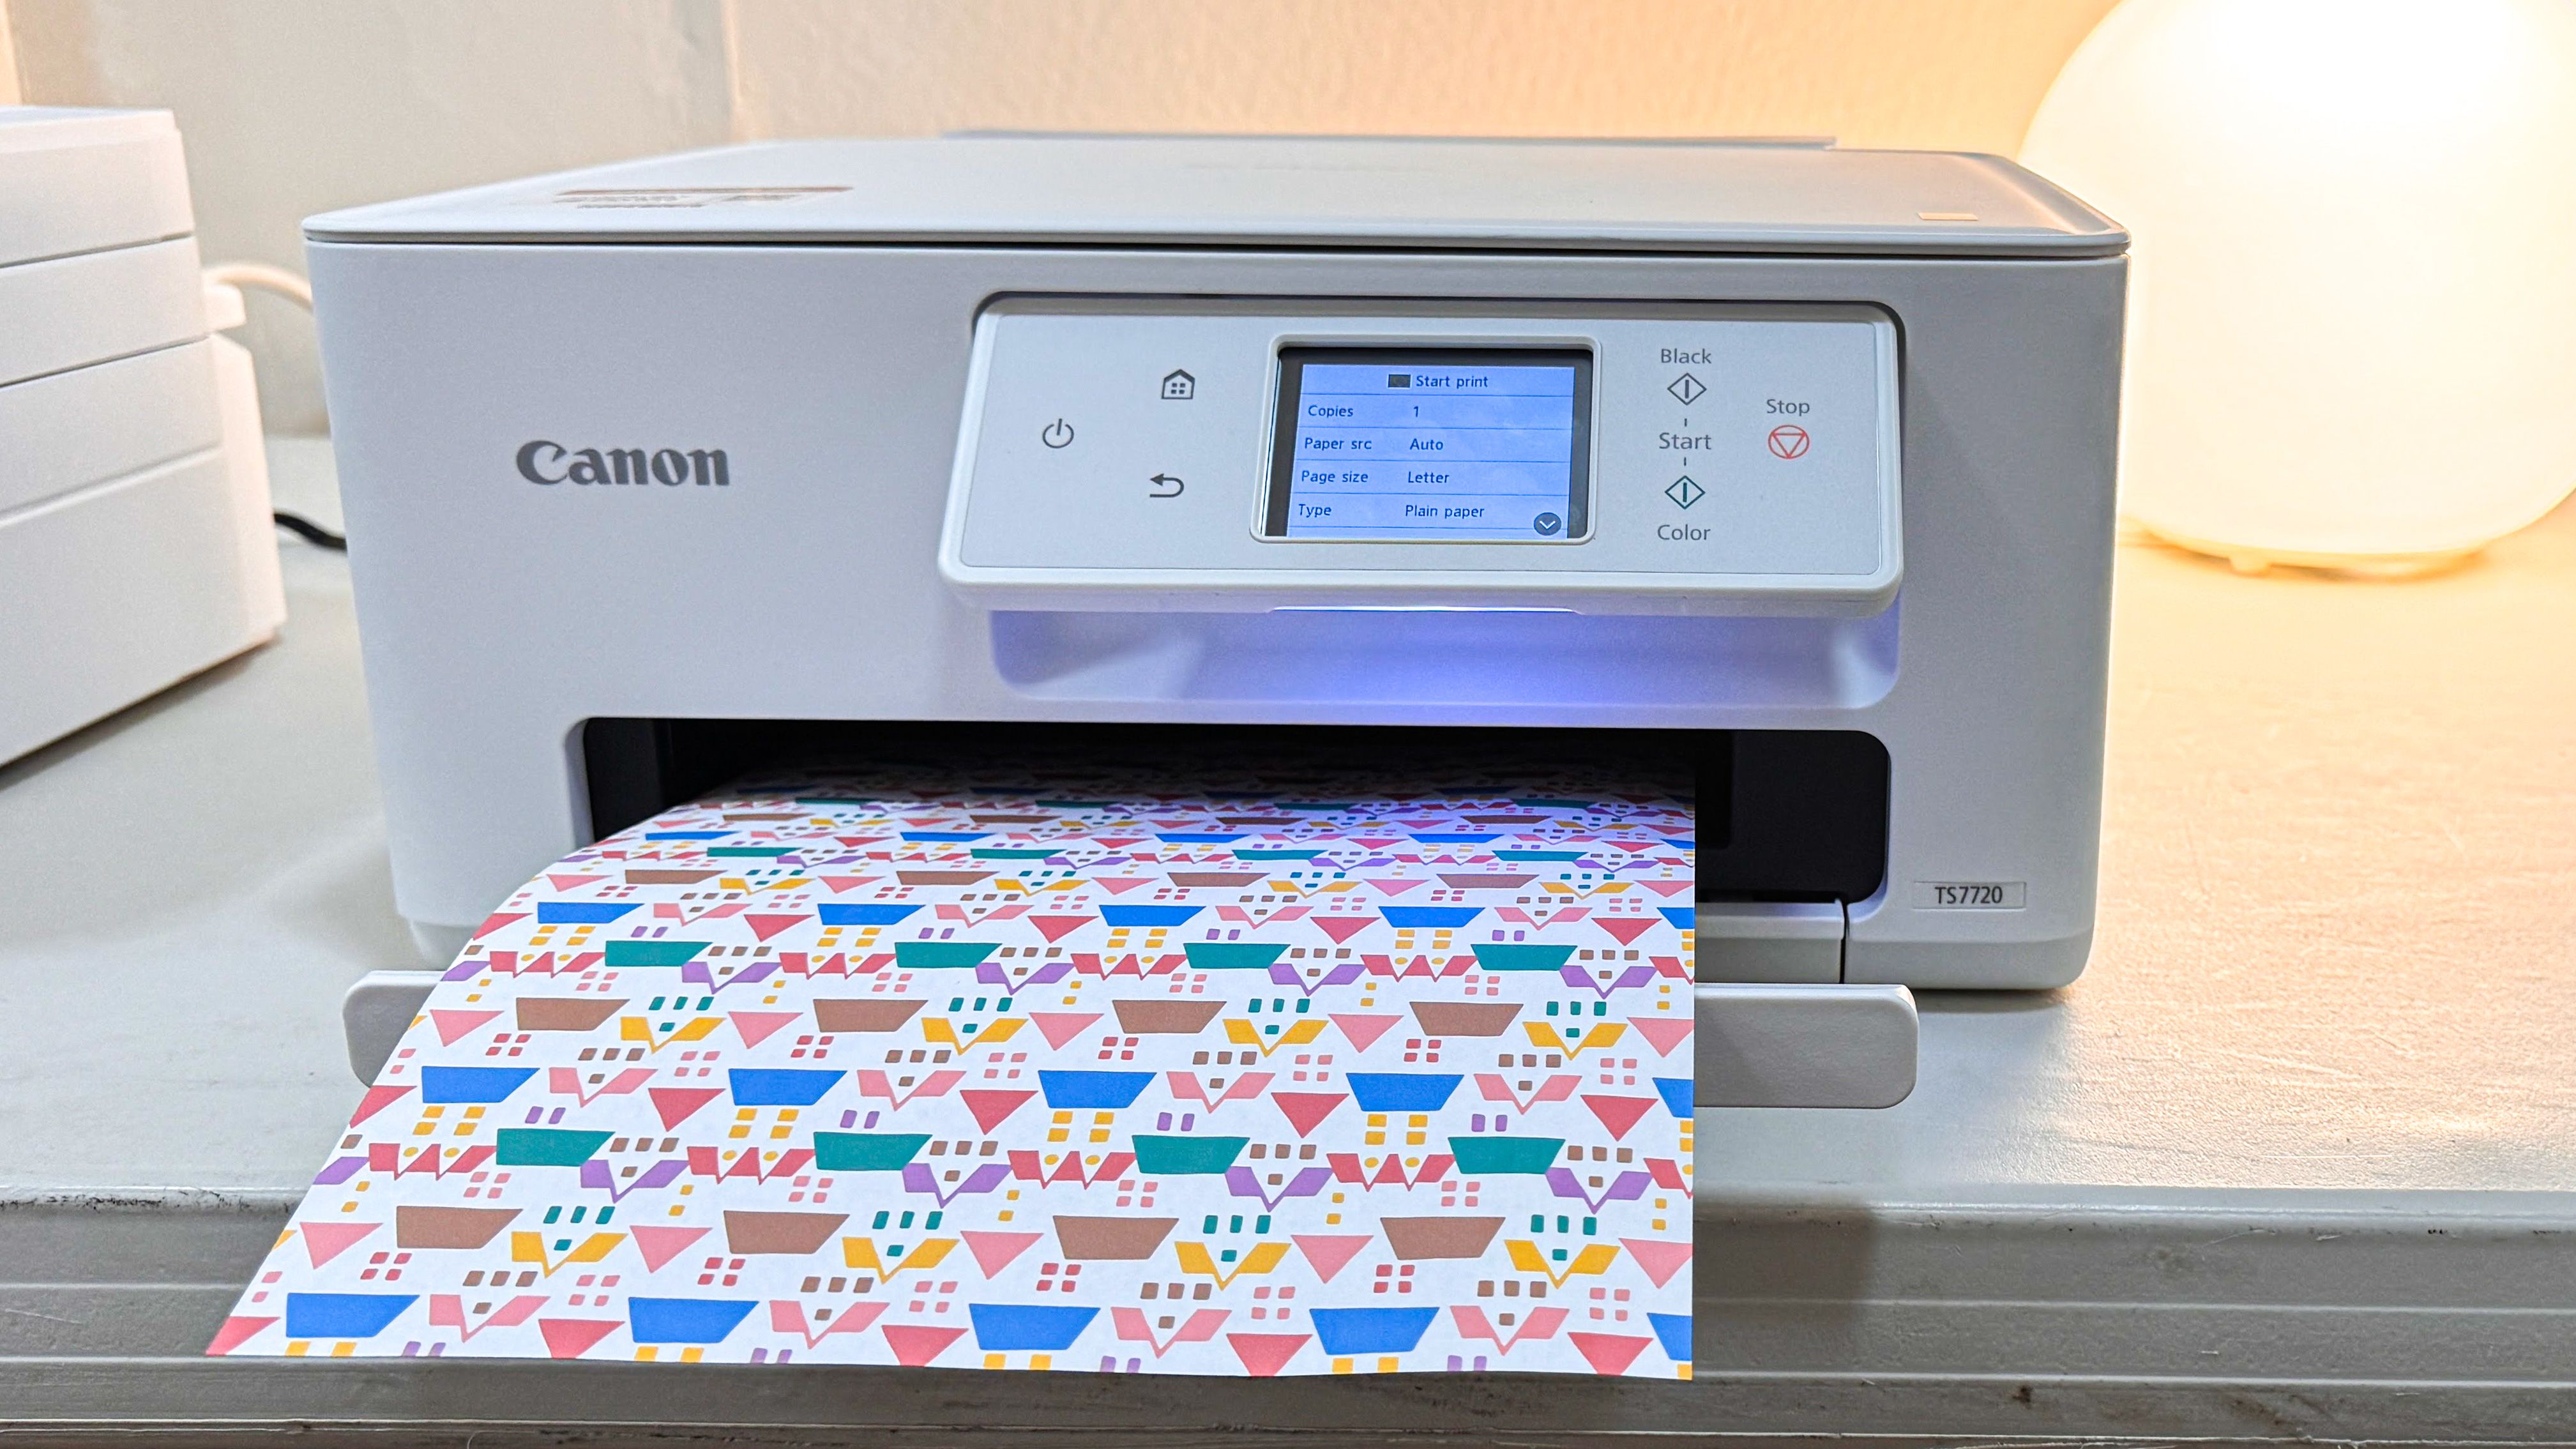 What is an inkjet printer?